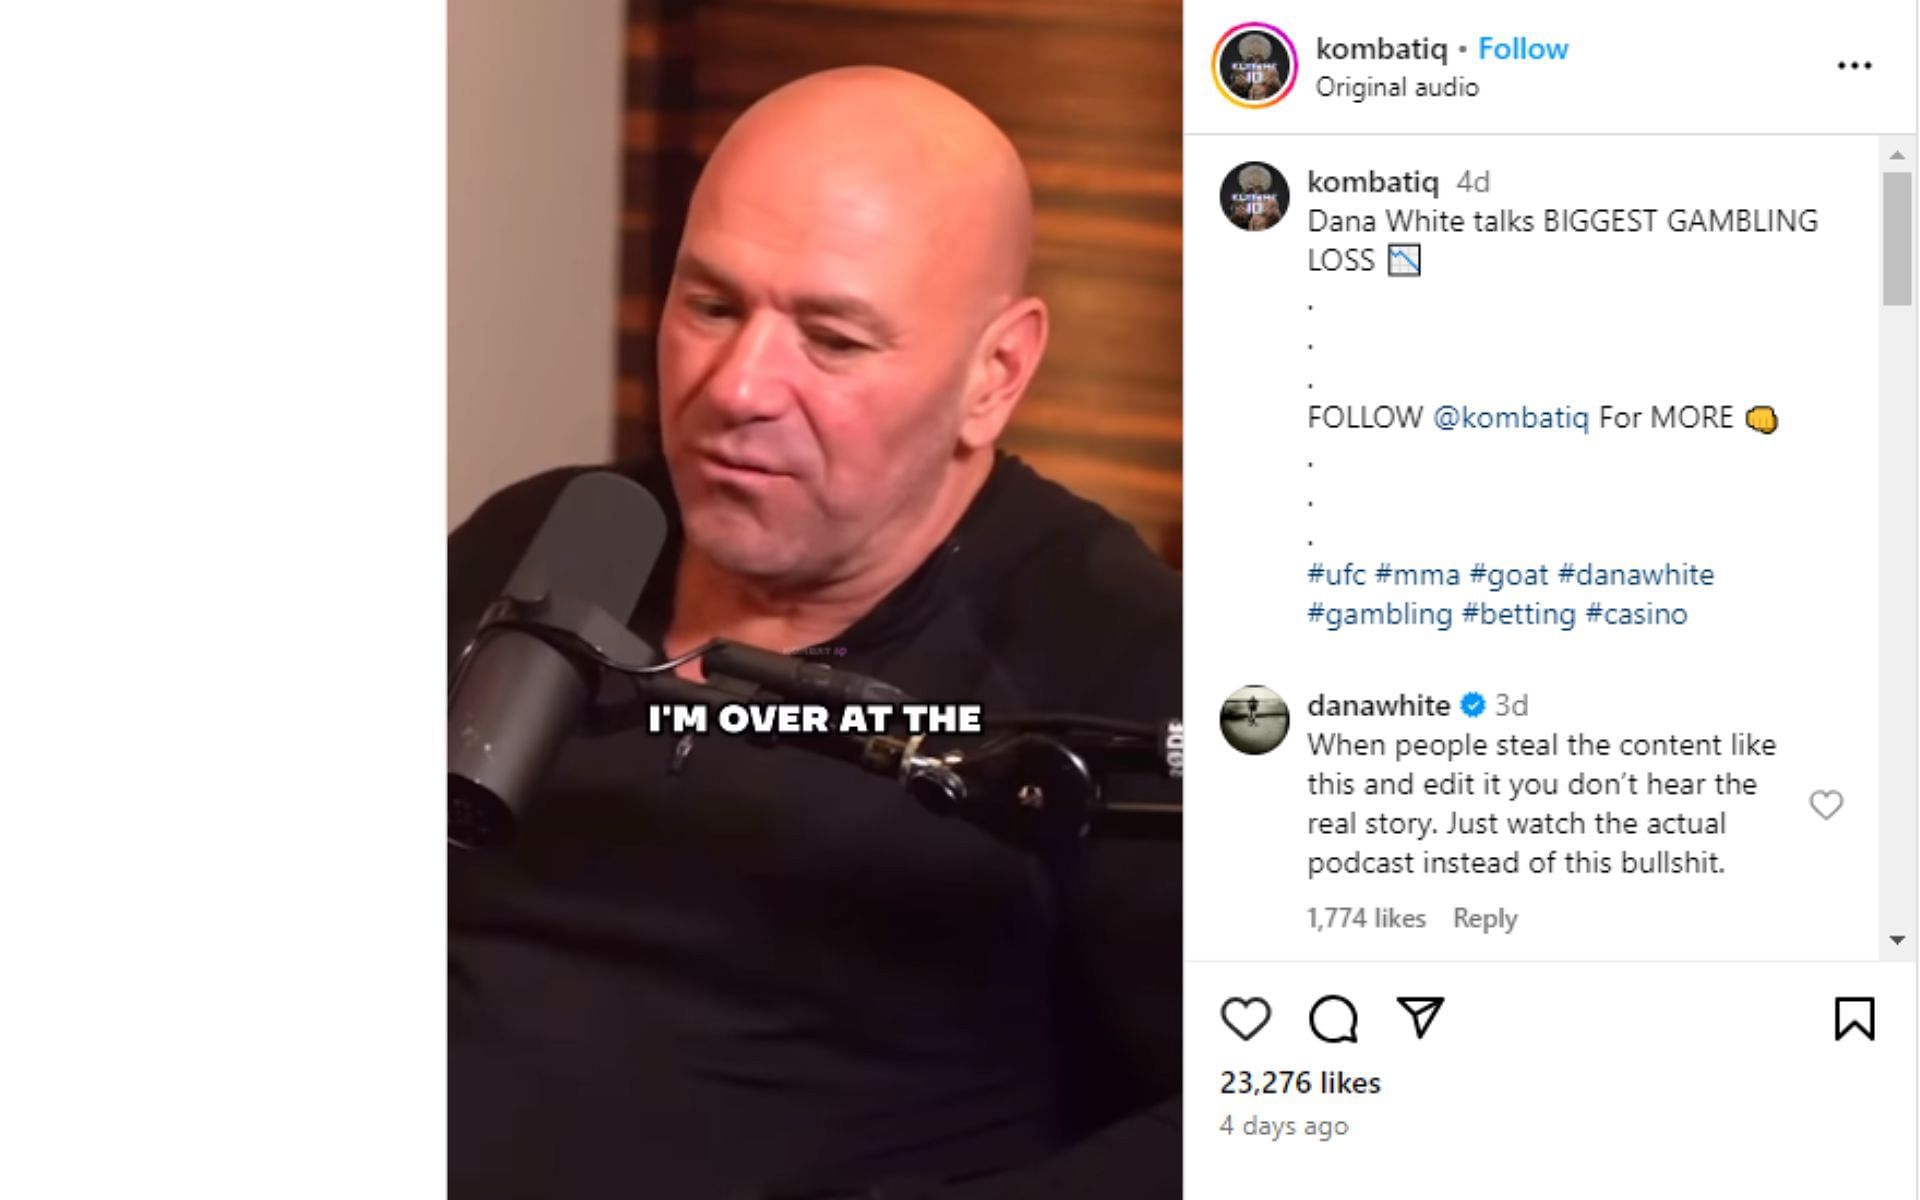 Dana White reacts to an edited video of him telling gambling story